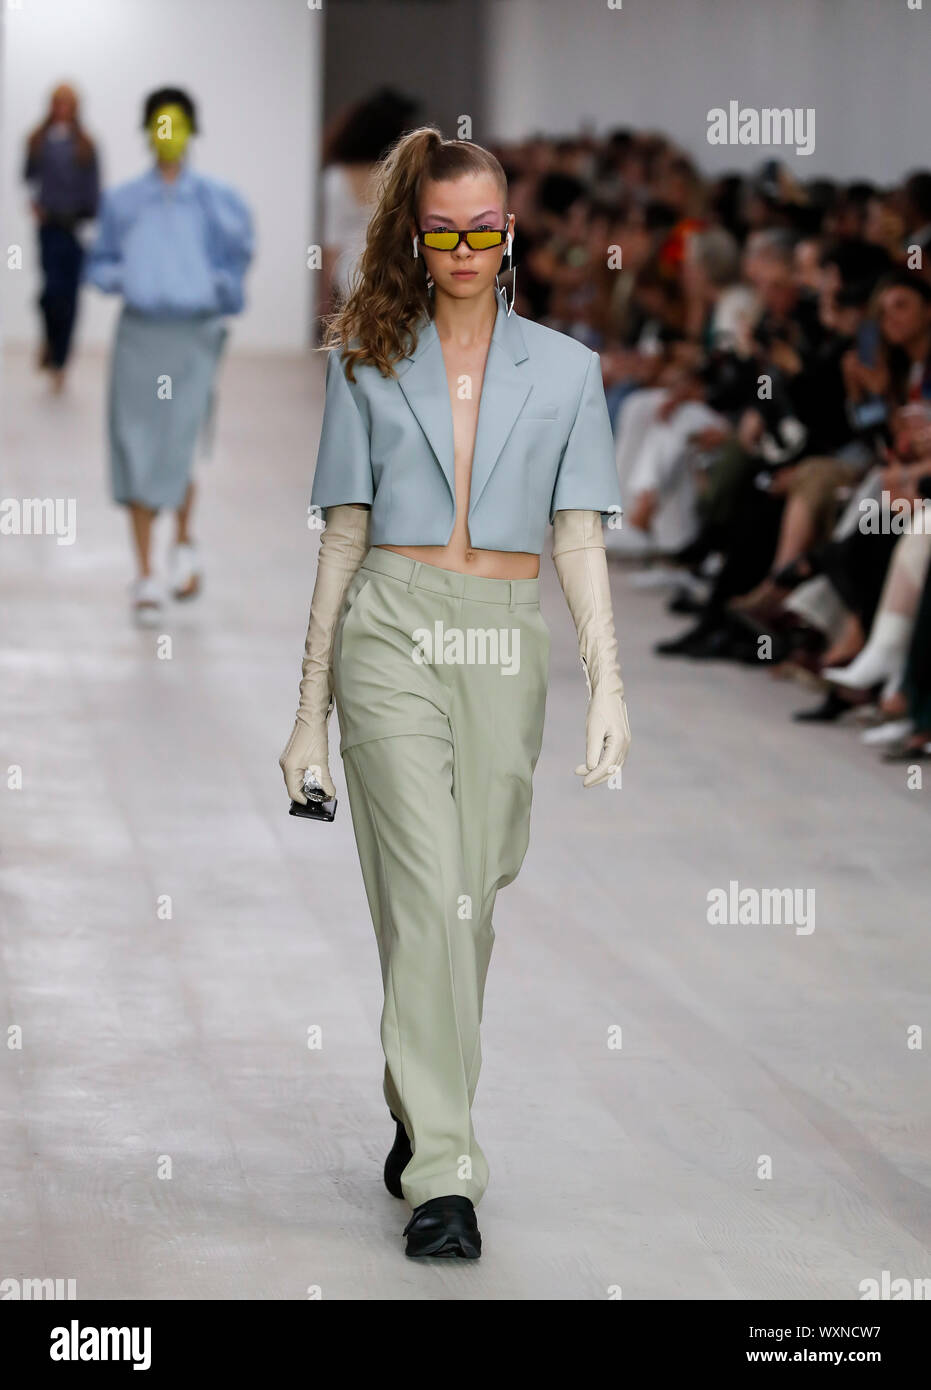 London, Britain. 17th Sep, 2019. Models walk the runway at the pushBUTTON show during the London Fashion Week 2019 in London, Britain, Sept. 17, 2019. Credit: Han Yan/Xinhua/Alamy Live News Stock Photo